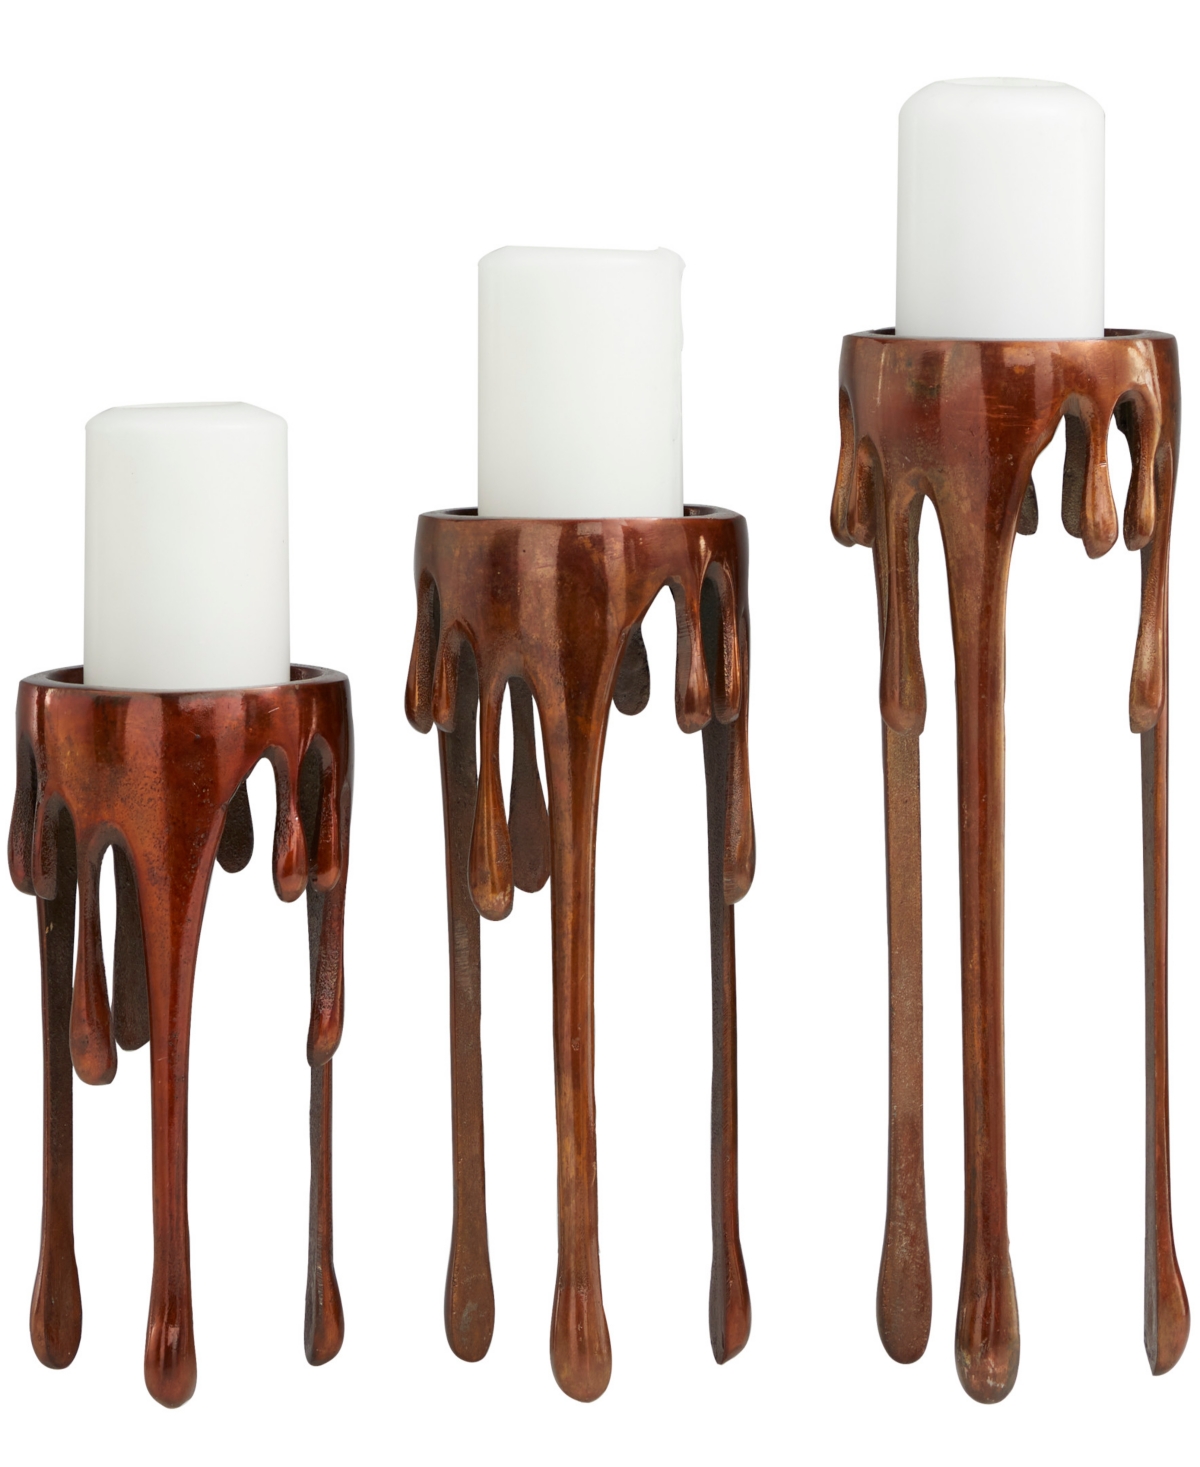 Rosemary Lane Aluminum Pillar Candle Holder With Dripping Melting Designed Legs Set Of 3 In Copper